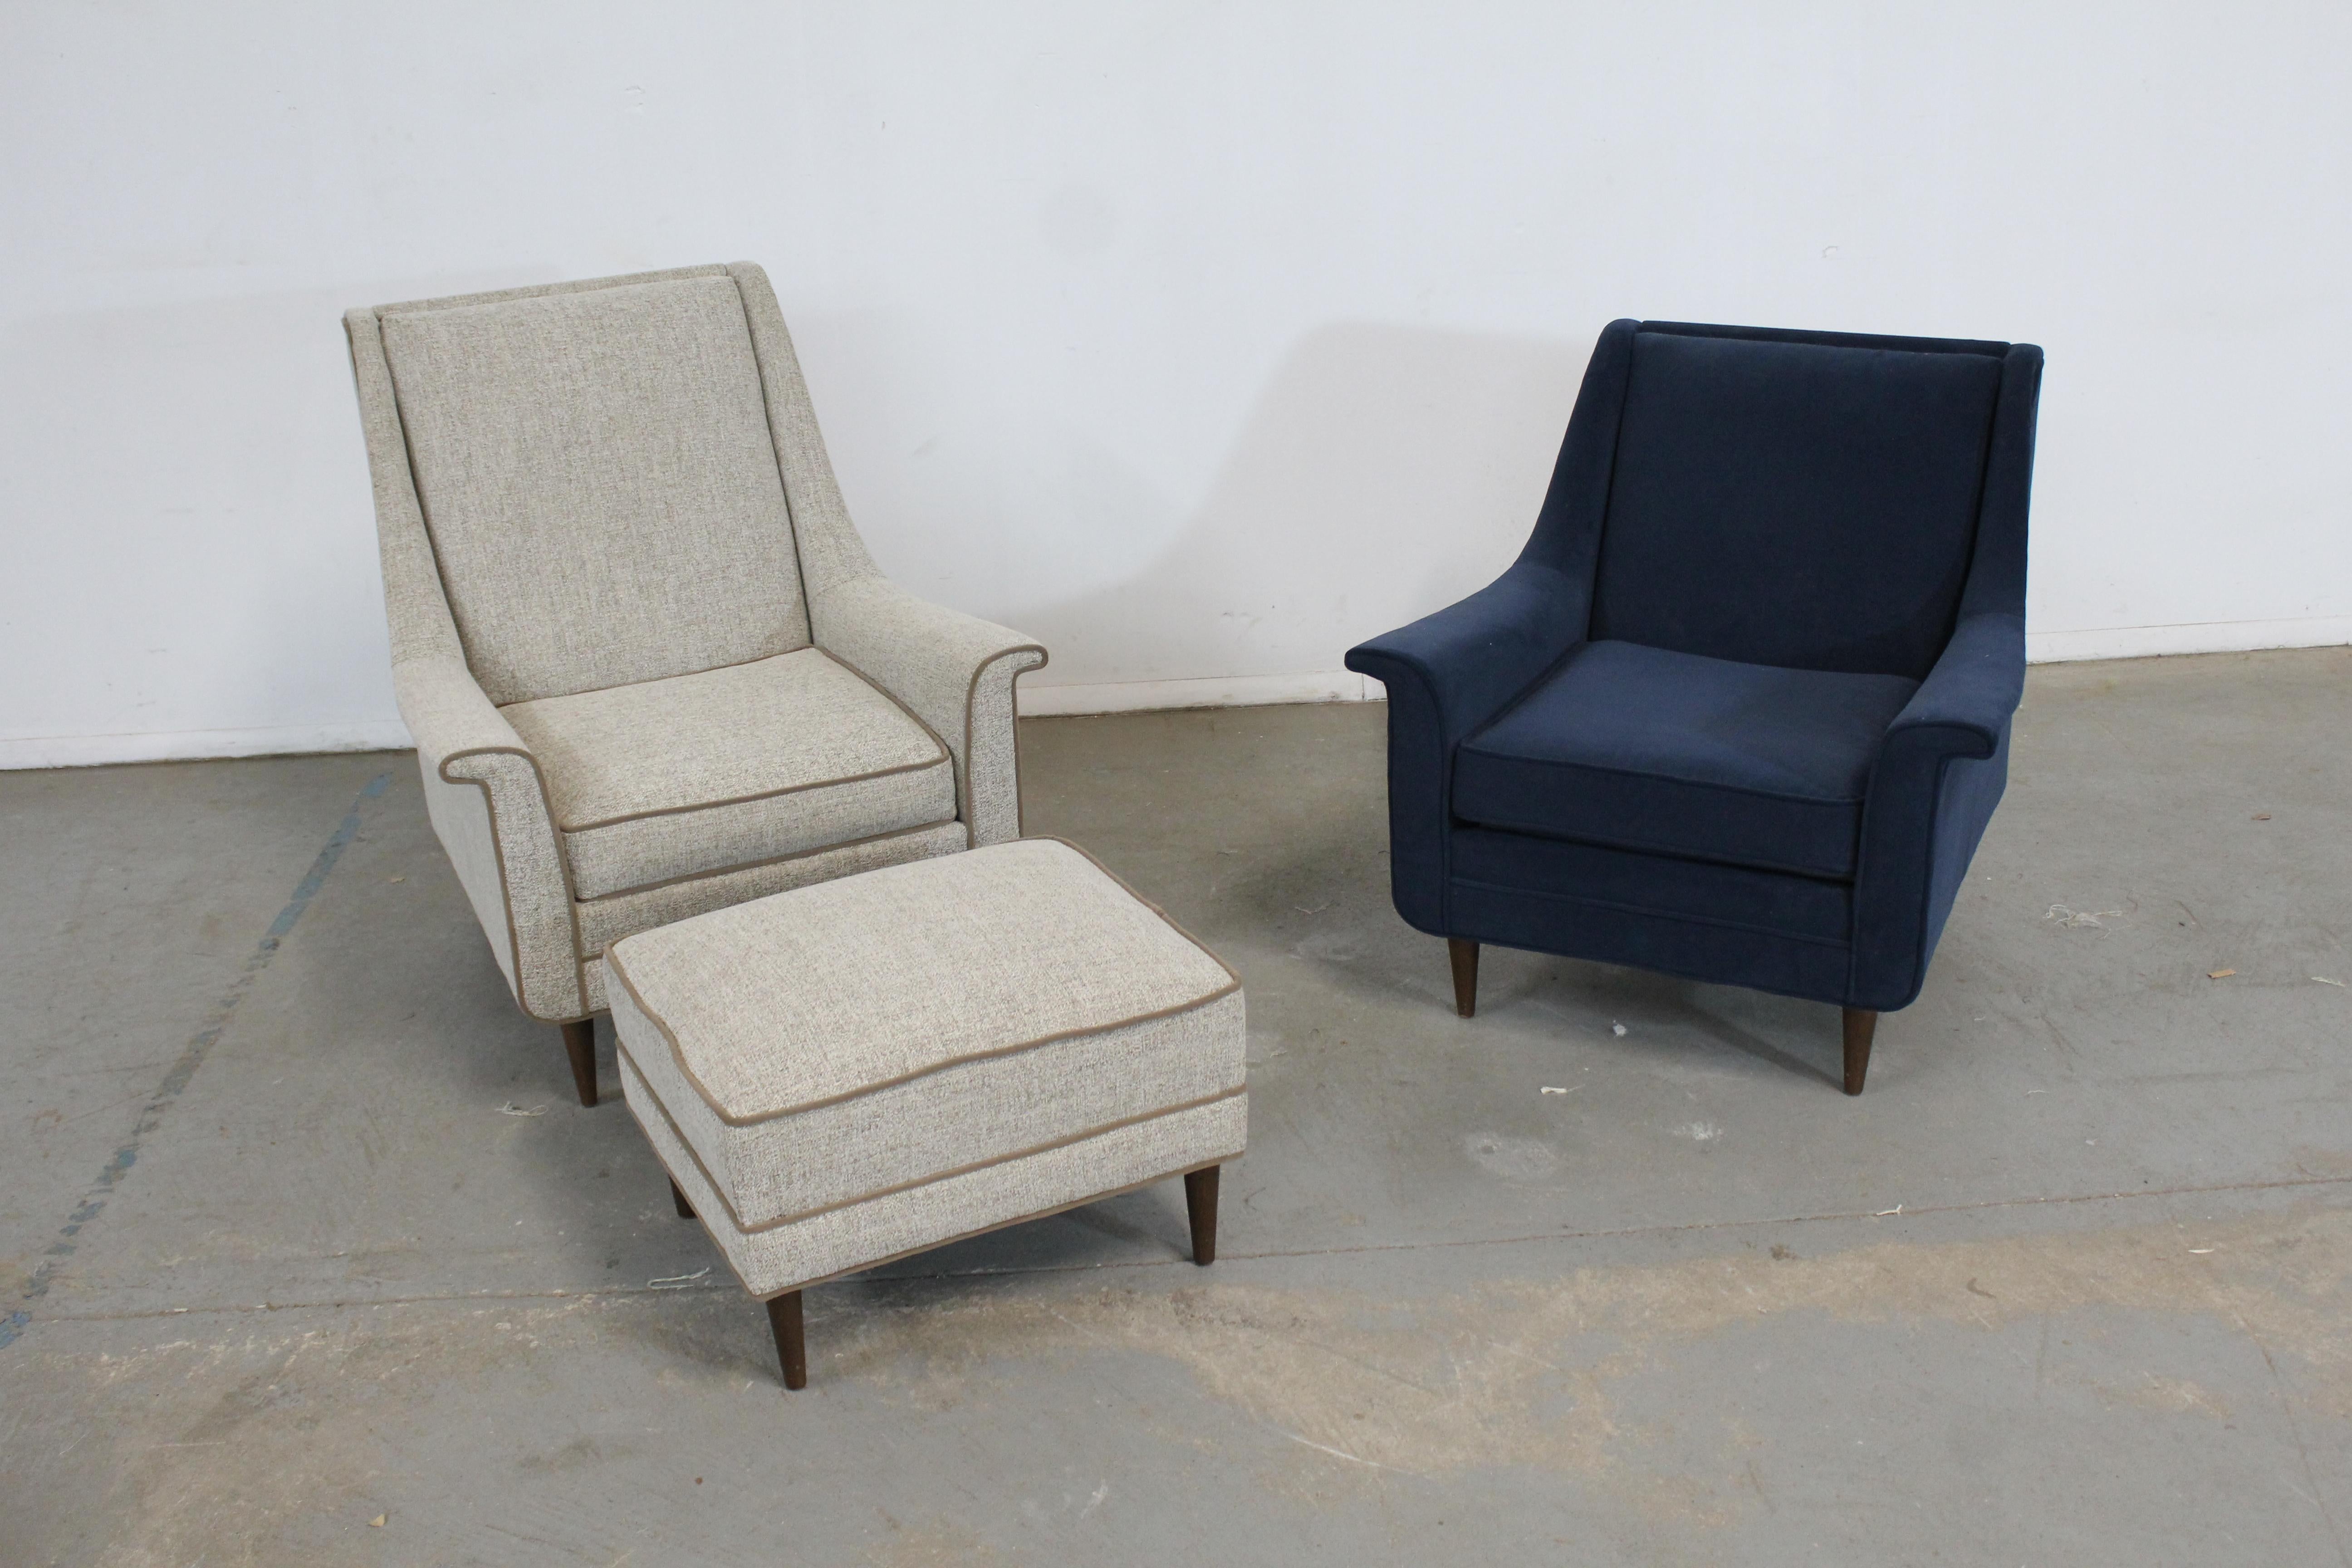 Pair of Mid-Century Modern Paul Mccobb Style Pencil Leg His/Her Lounge Chairs with Ottoman

Offered is a pair of Mid-Century Modern  his/her lounge chairs and a matching ottoman. These Paul Mccobb Style Lounge chairs feature the signature Pencil